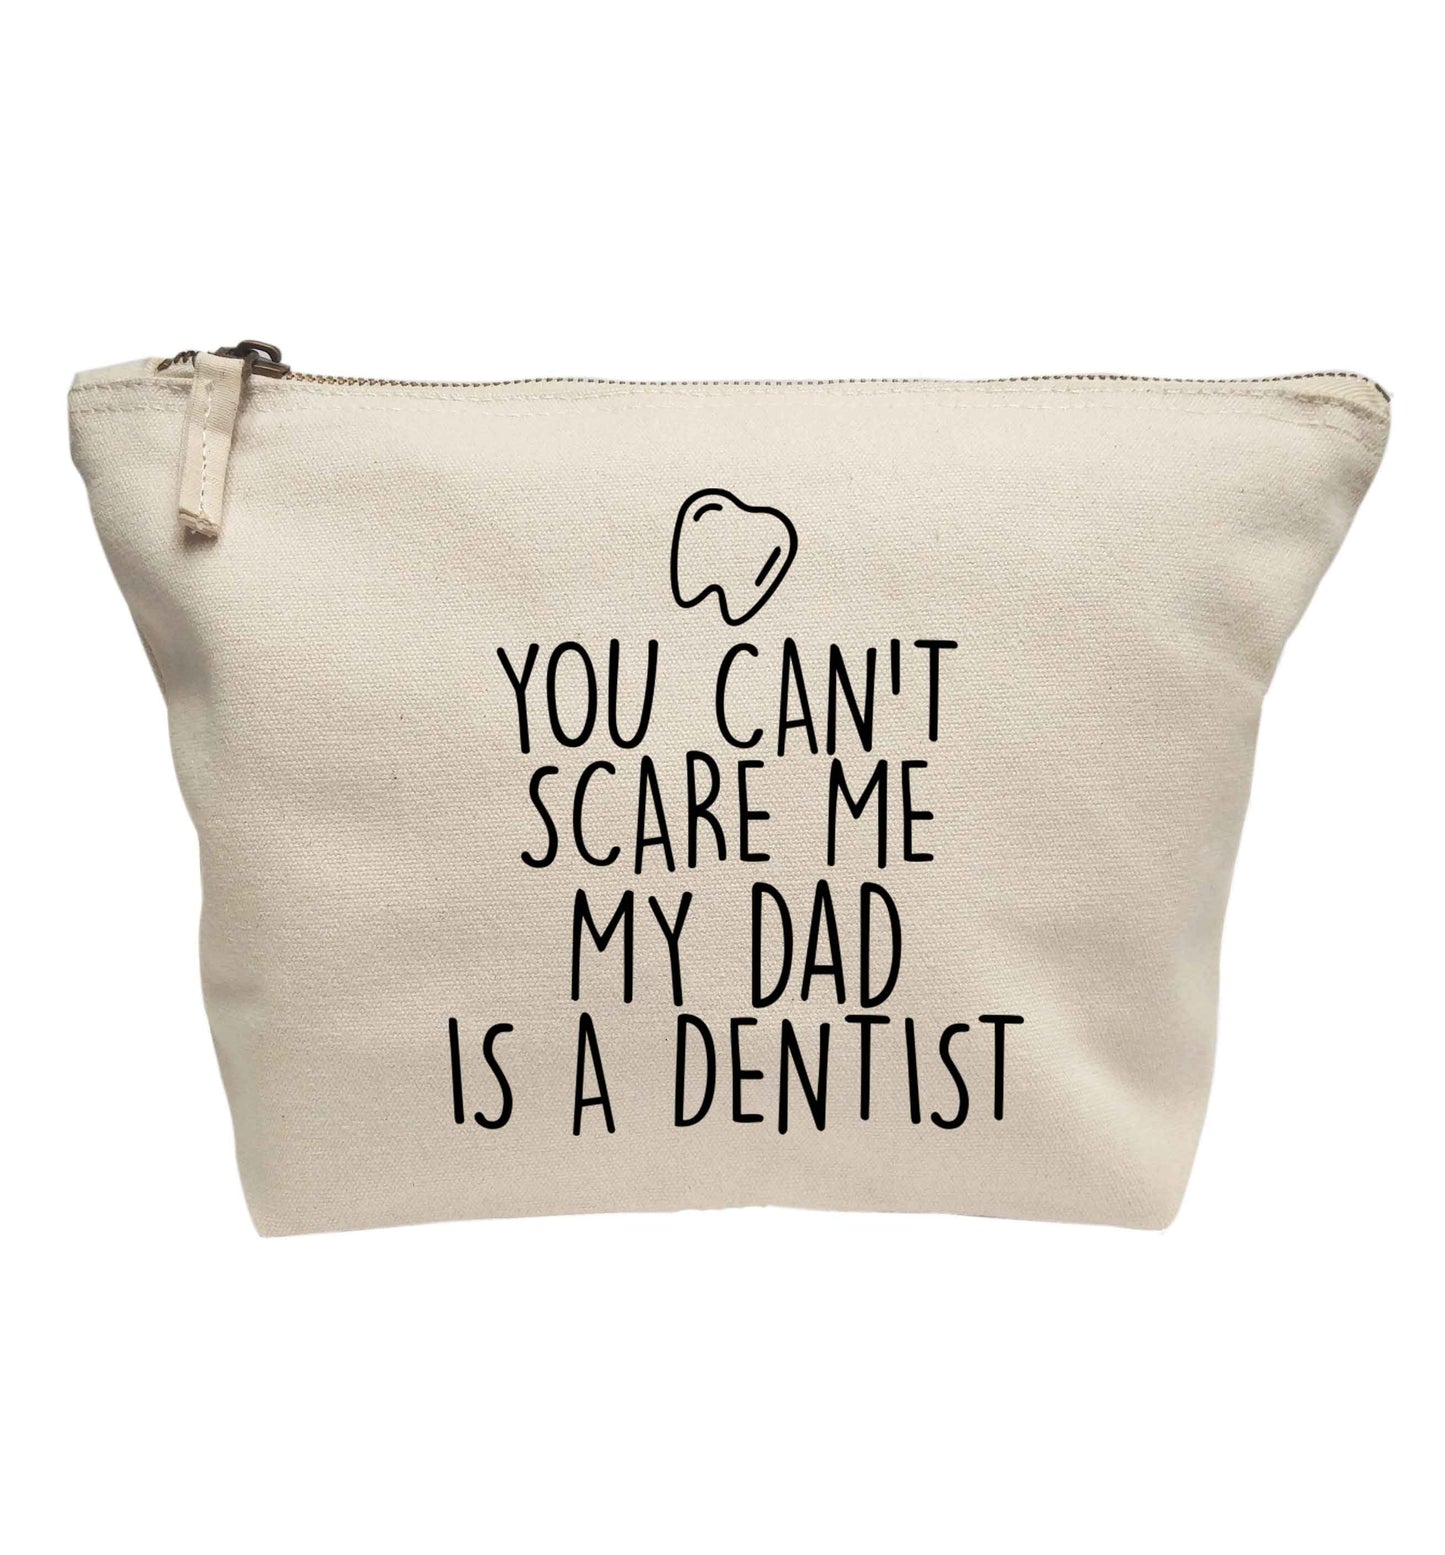 You can't scare me my dad is a dentist | Makeup / wash bag